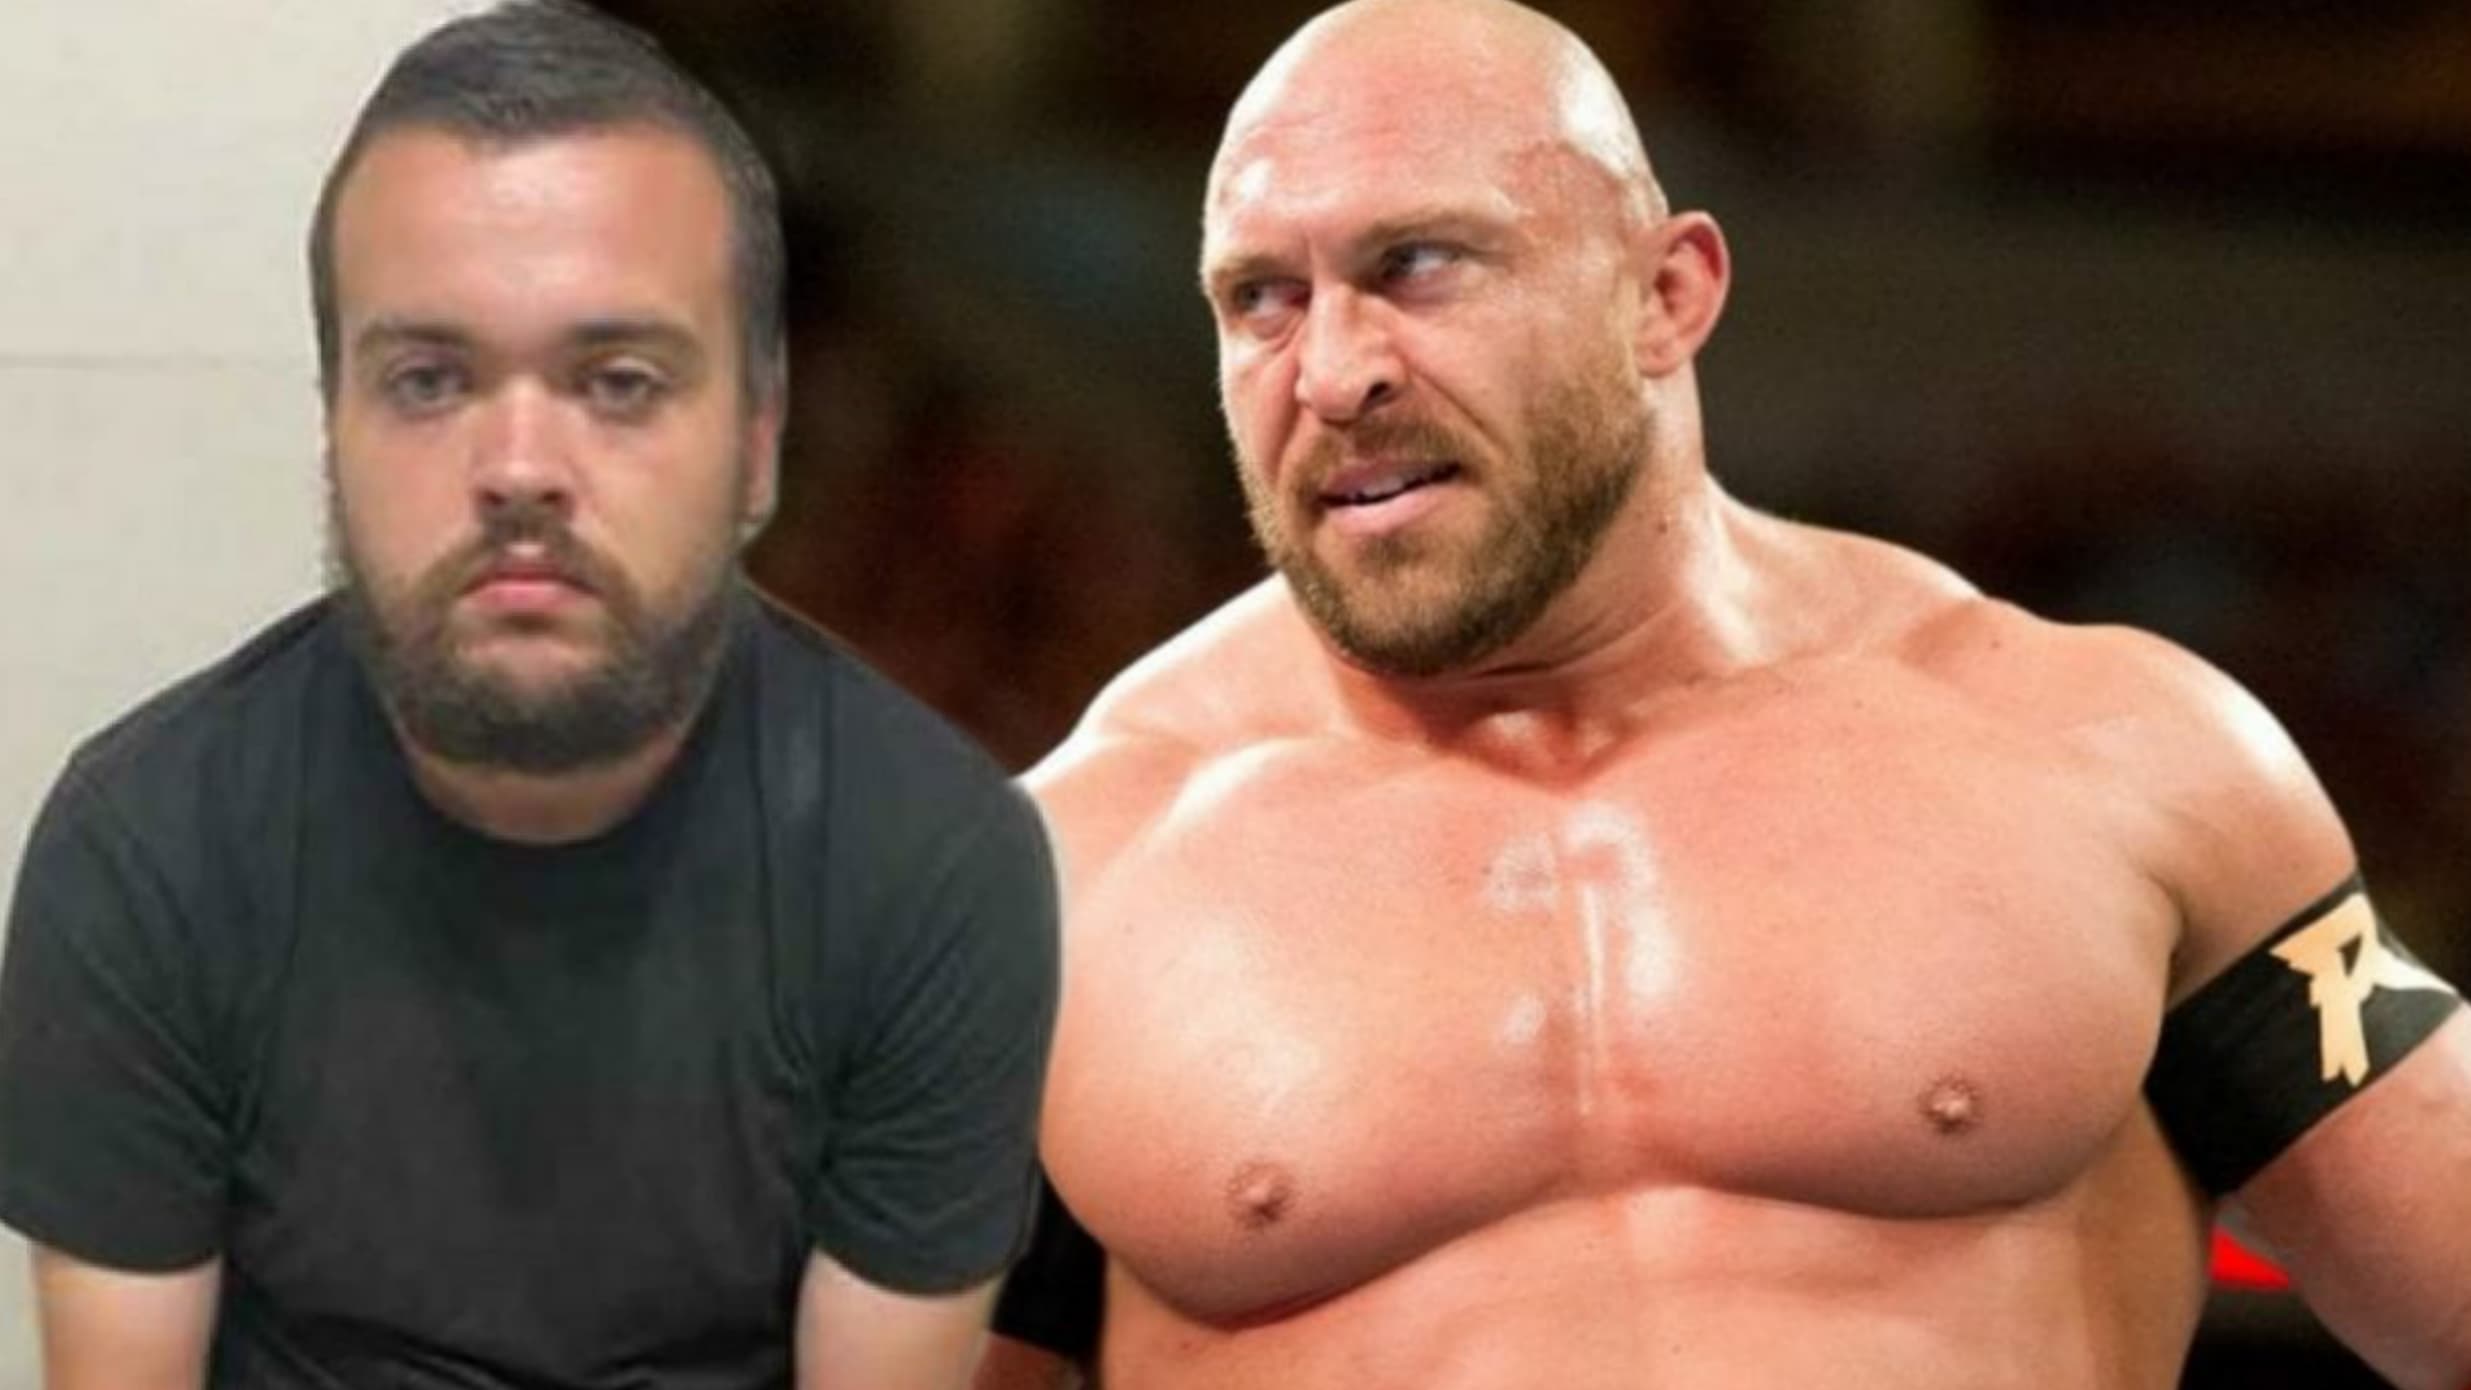 Ryback Wishes They Would Have ‘Shot & Killed’ Sonya Deville’s Stalker ‘On The Spot’